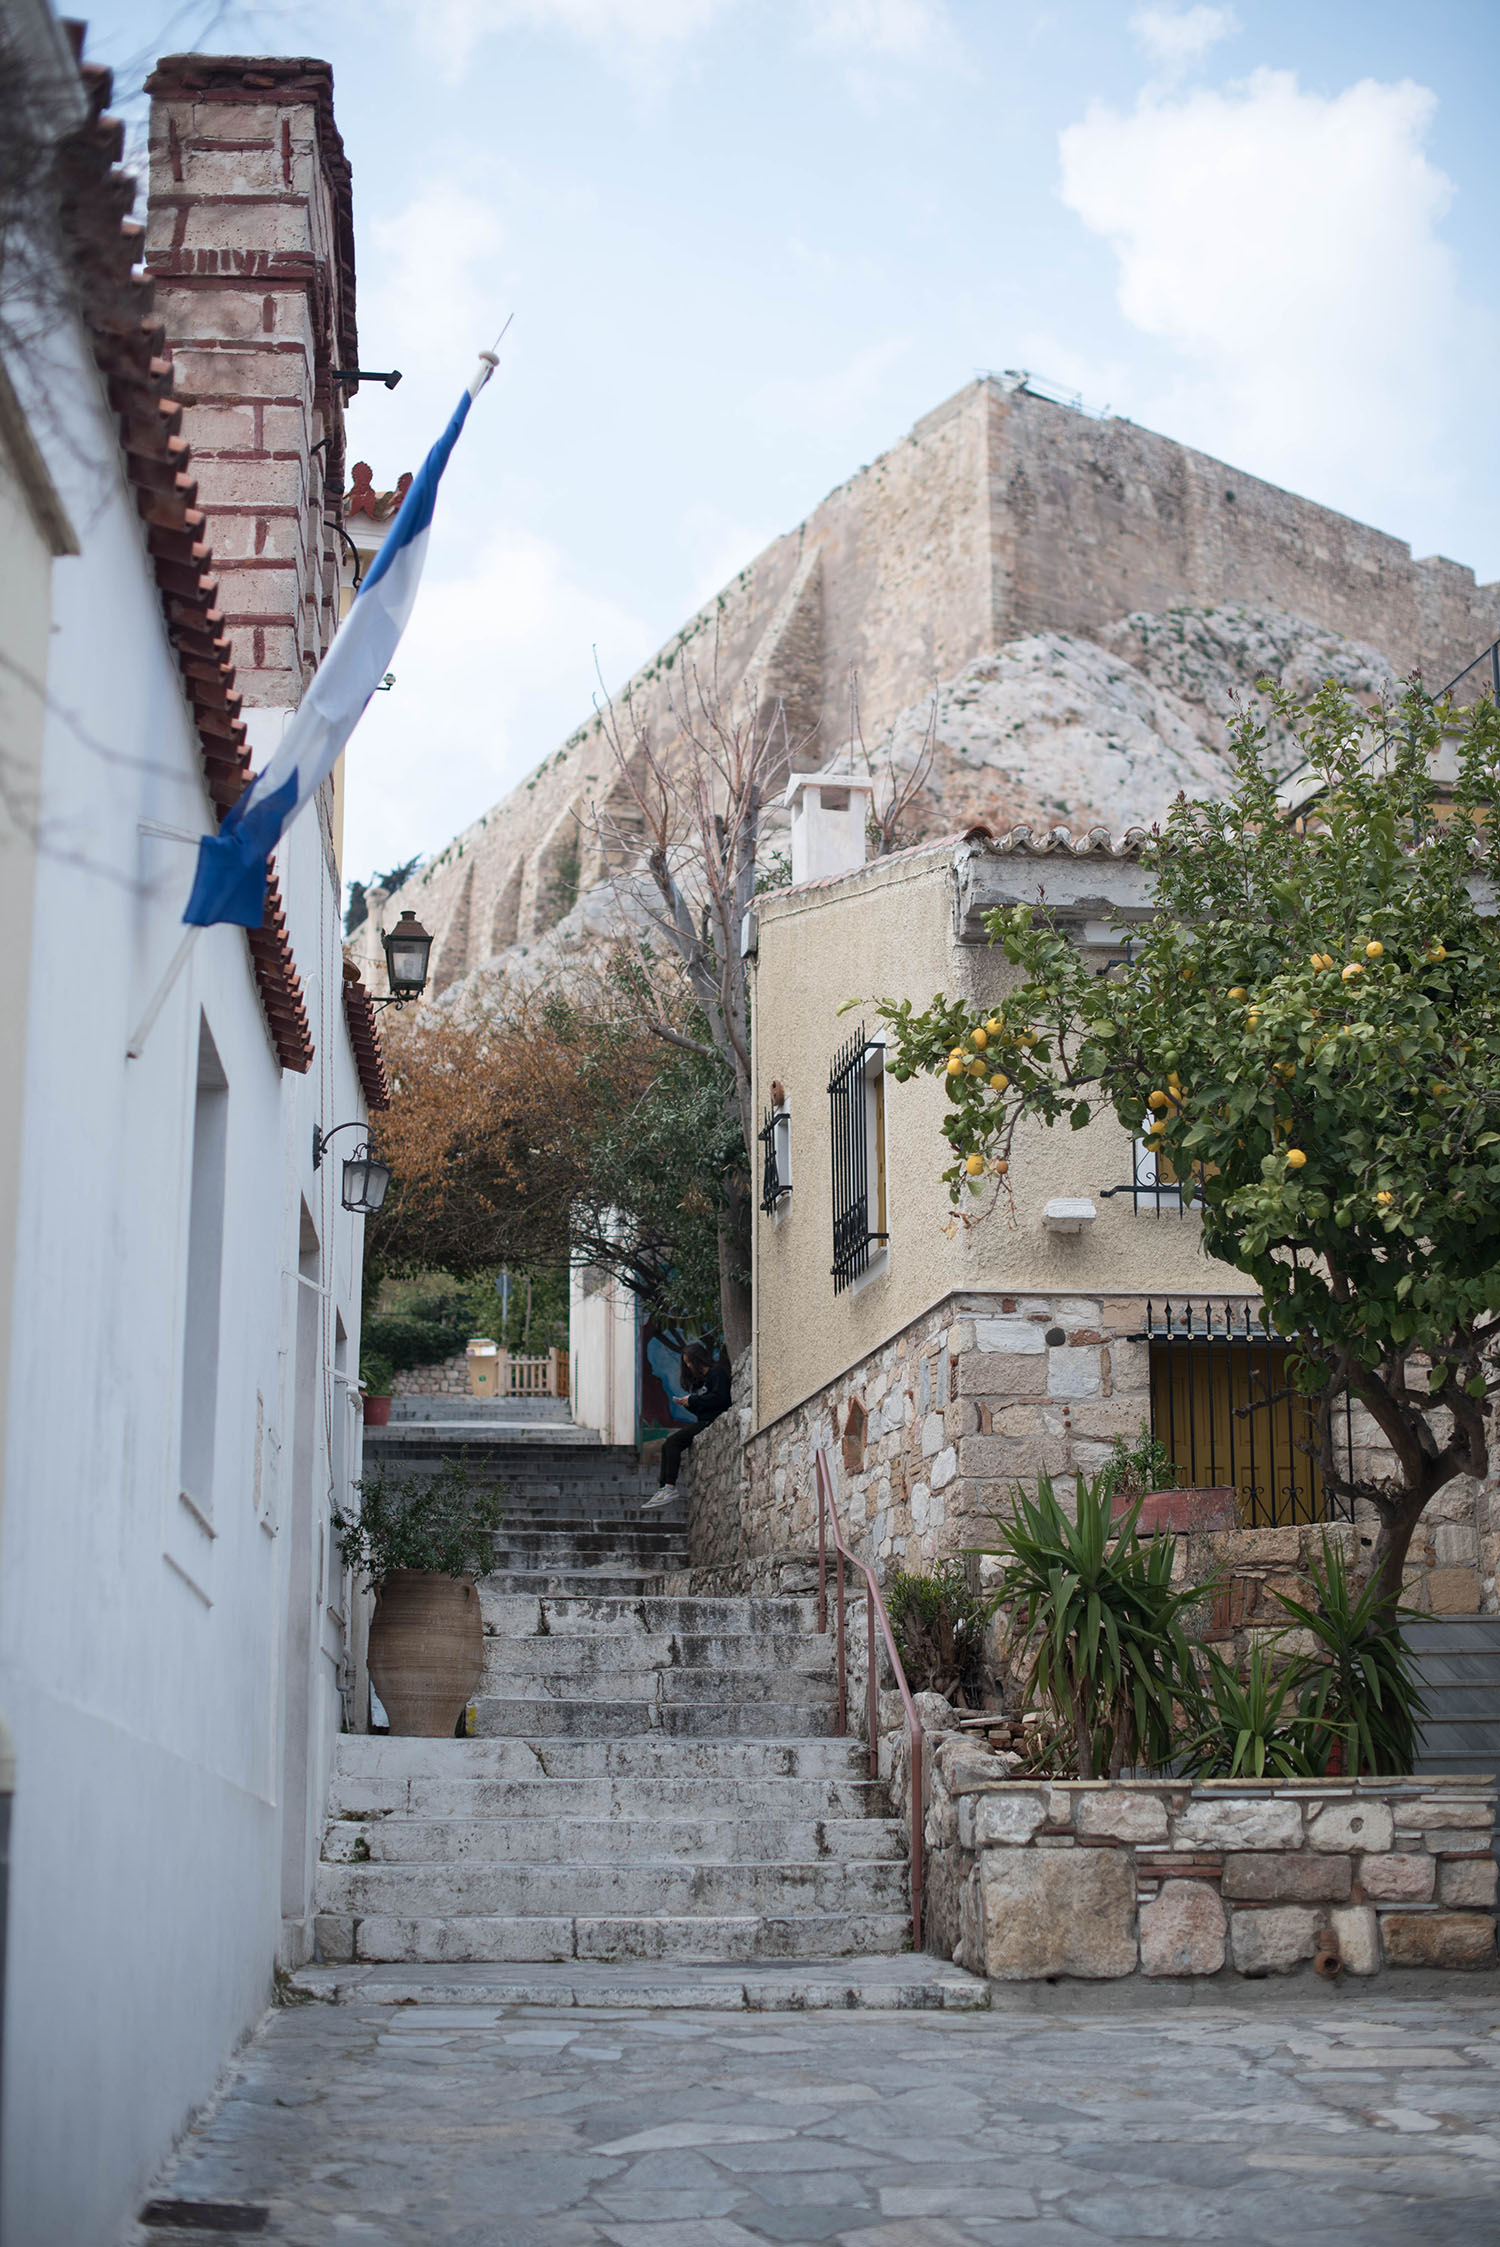 A small lane in the Plaka neighbourhood of Athens with a view of Acropolis Hill, photographed by Winnipeg travel blogger Cee Fardoe of Coco & Vera